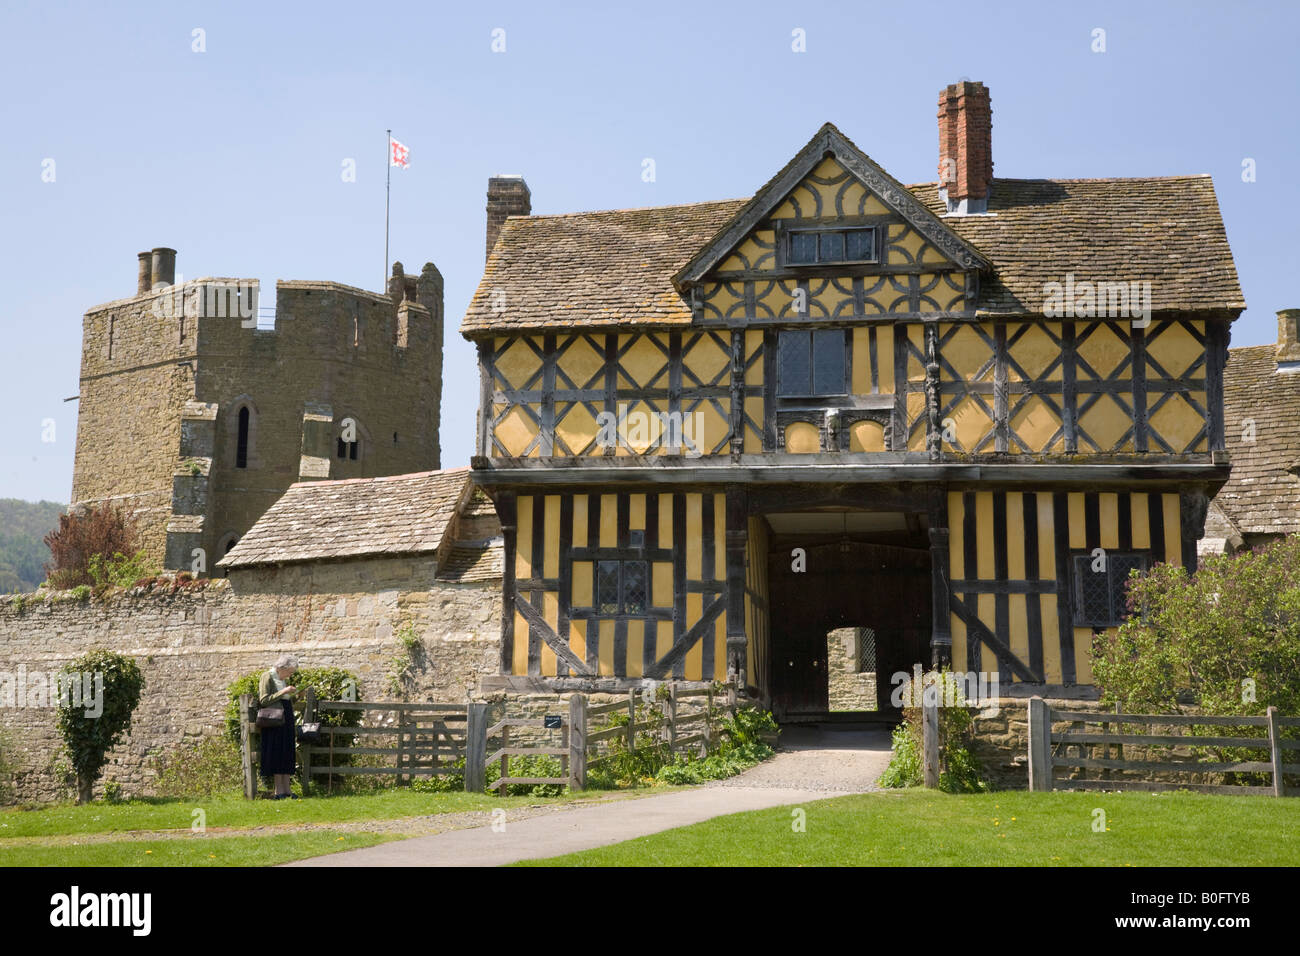 Stokesay Castle 13th century fortified manor house with 17th century timber framed gatehouse. Craven Arms Shropshire West Midlands England UK Stock Photo